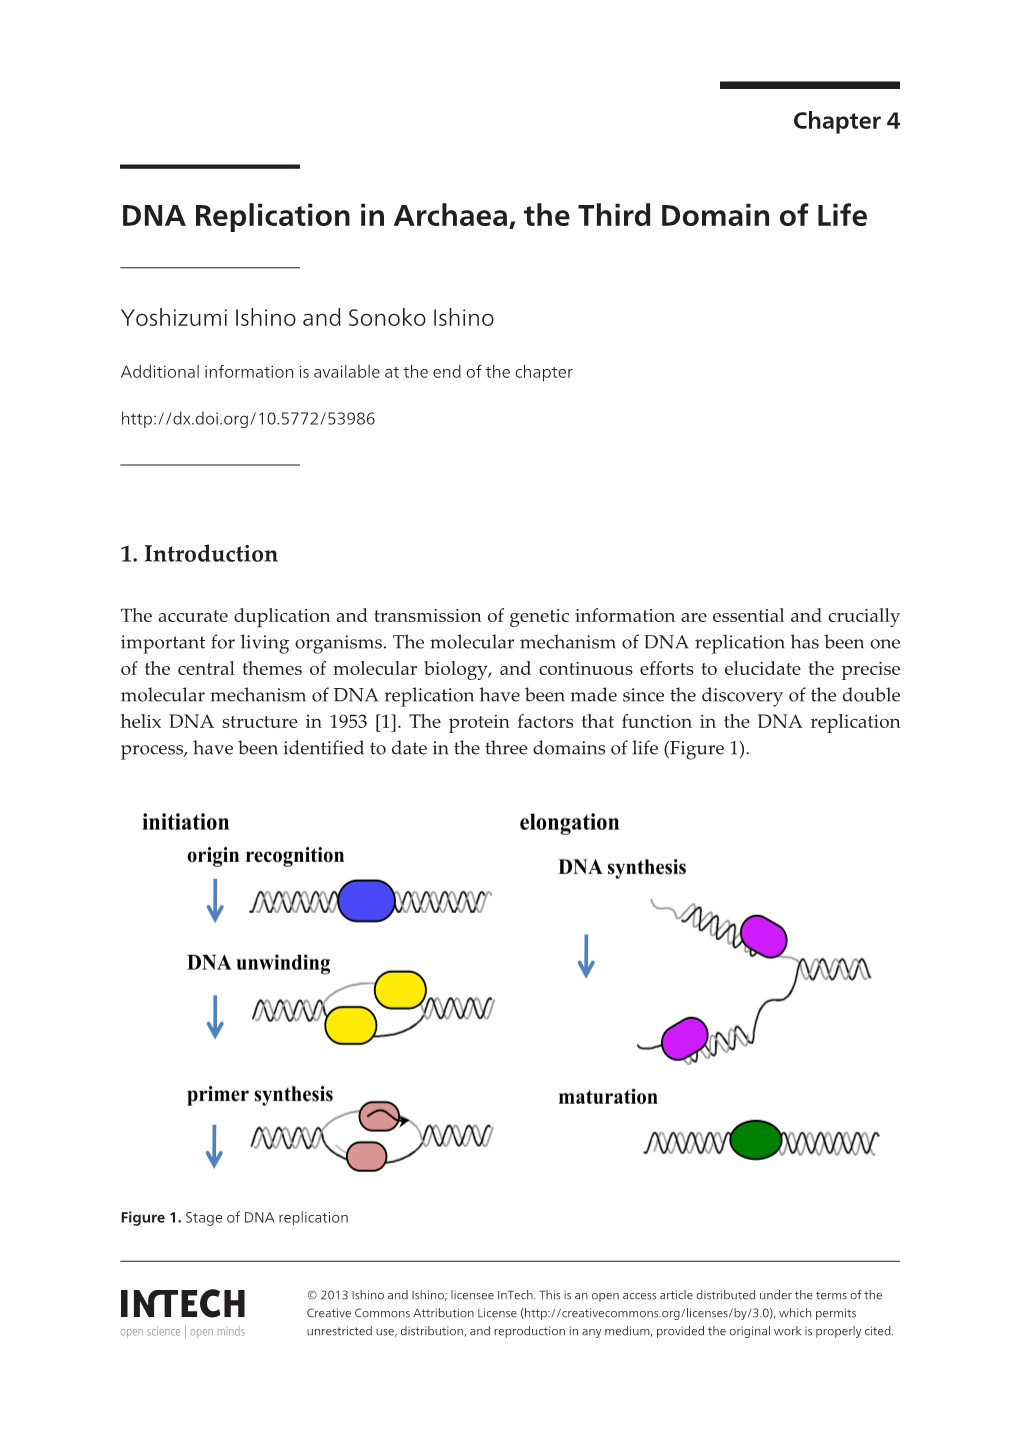 DNA Replication in Archaea, the Third Domain of Life